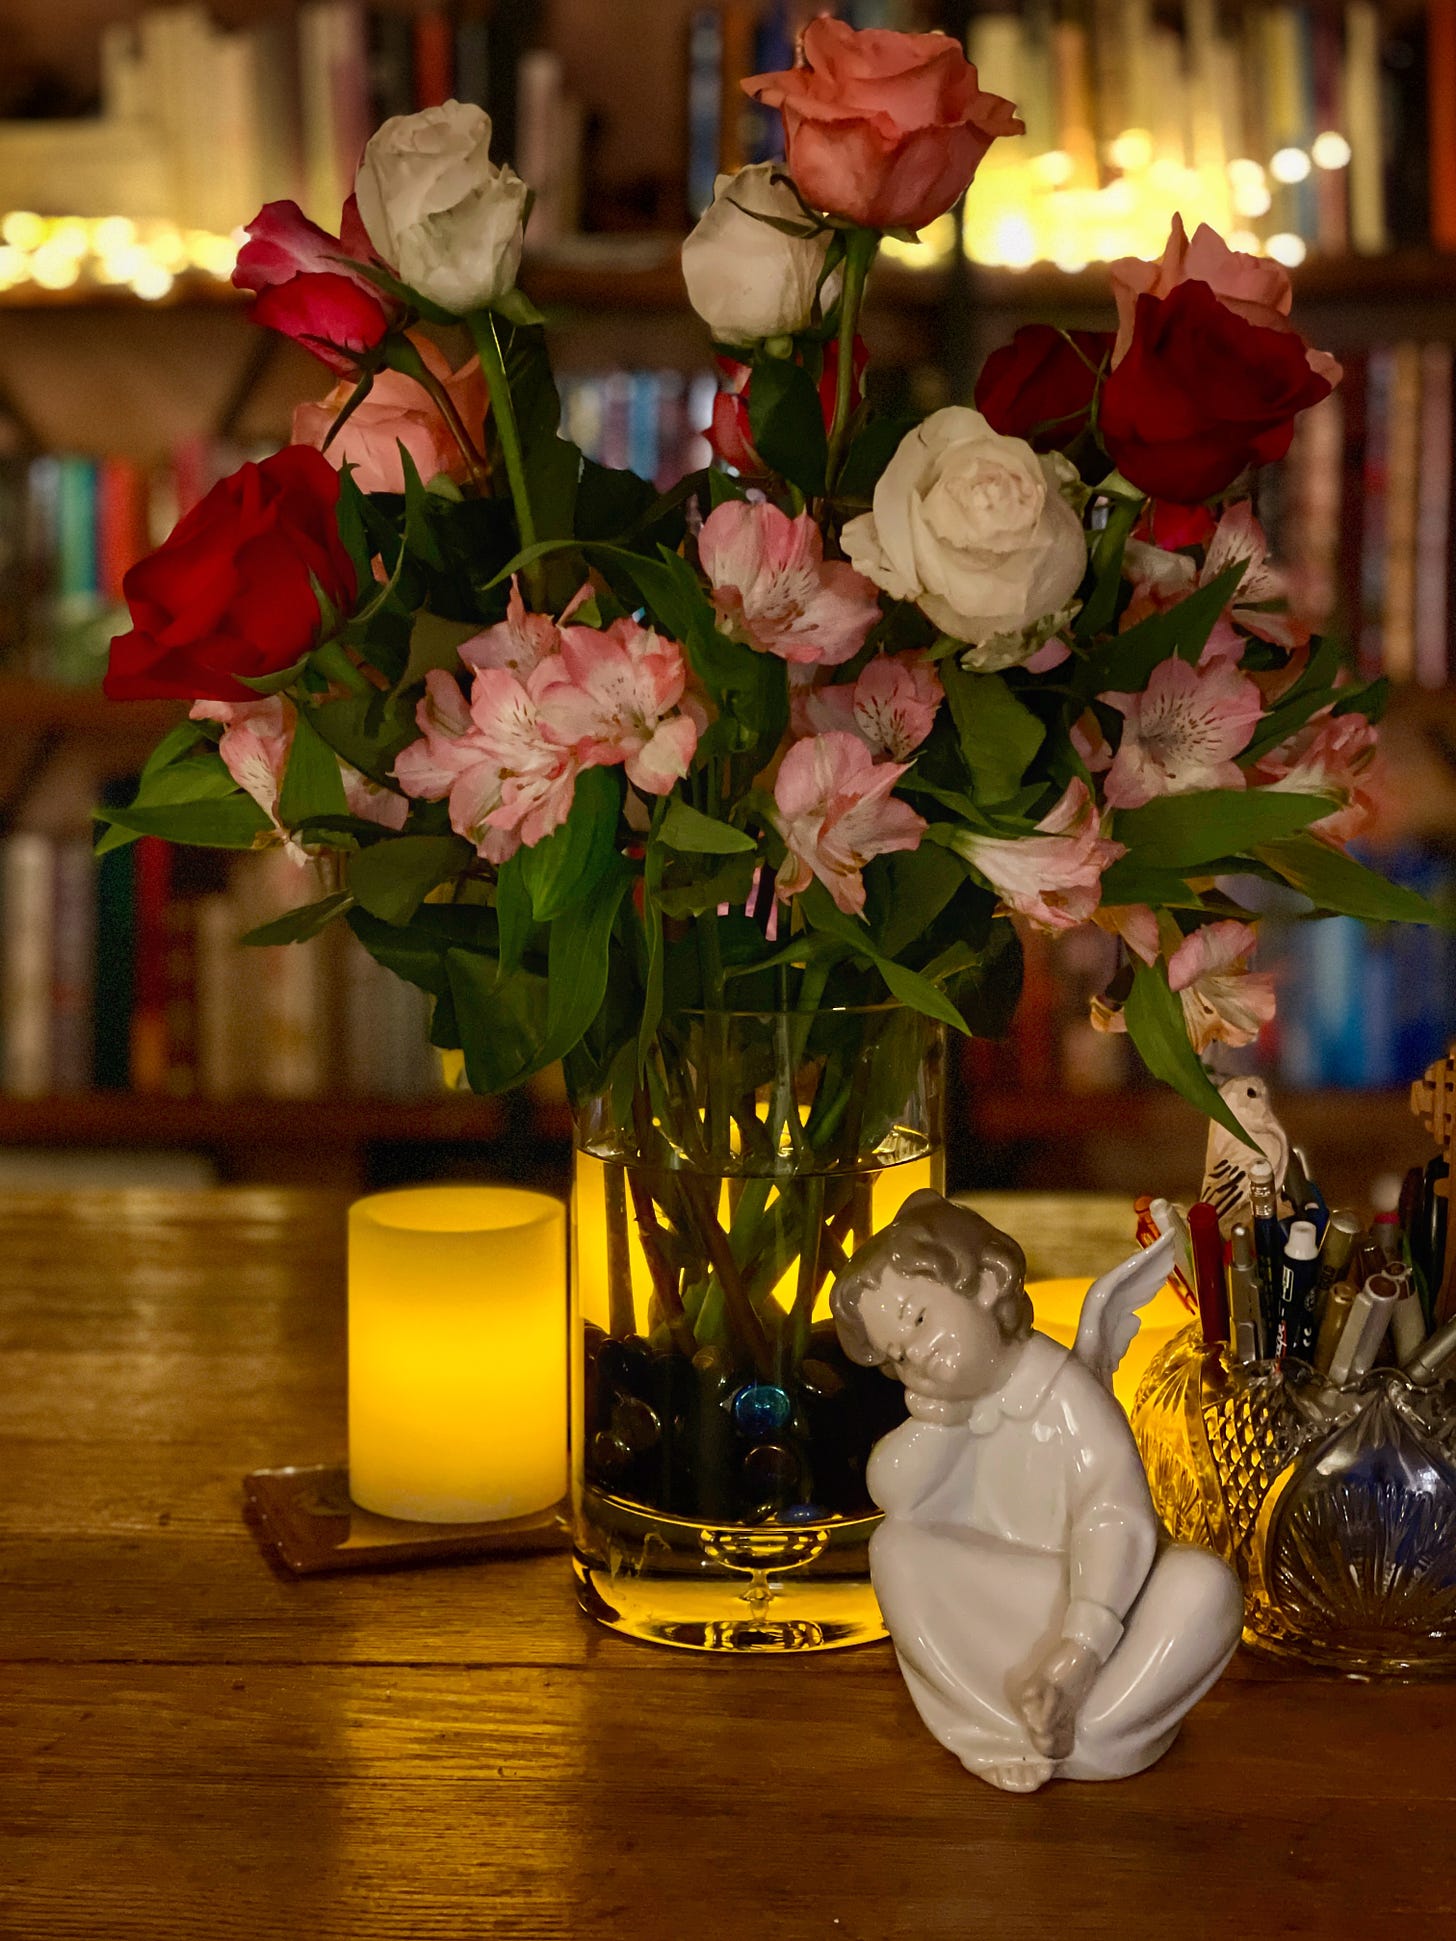 angel statue and flowers on table